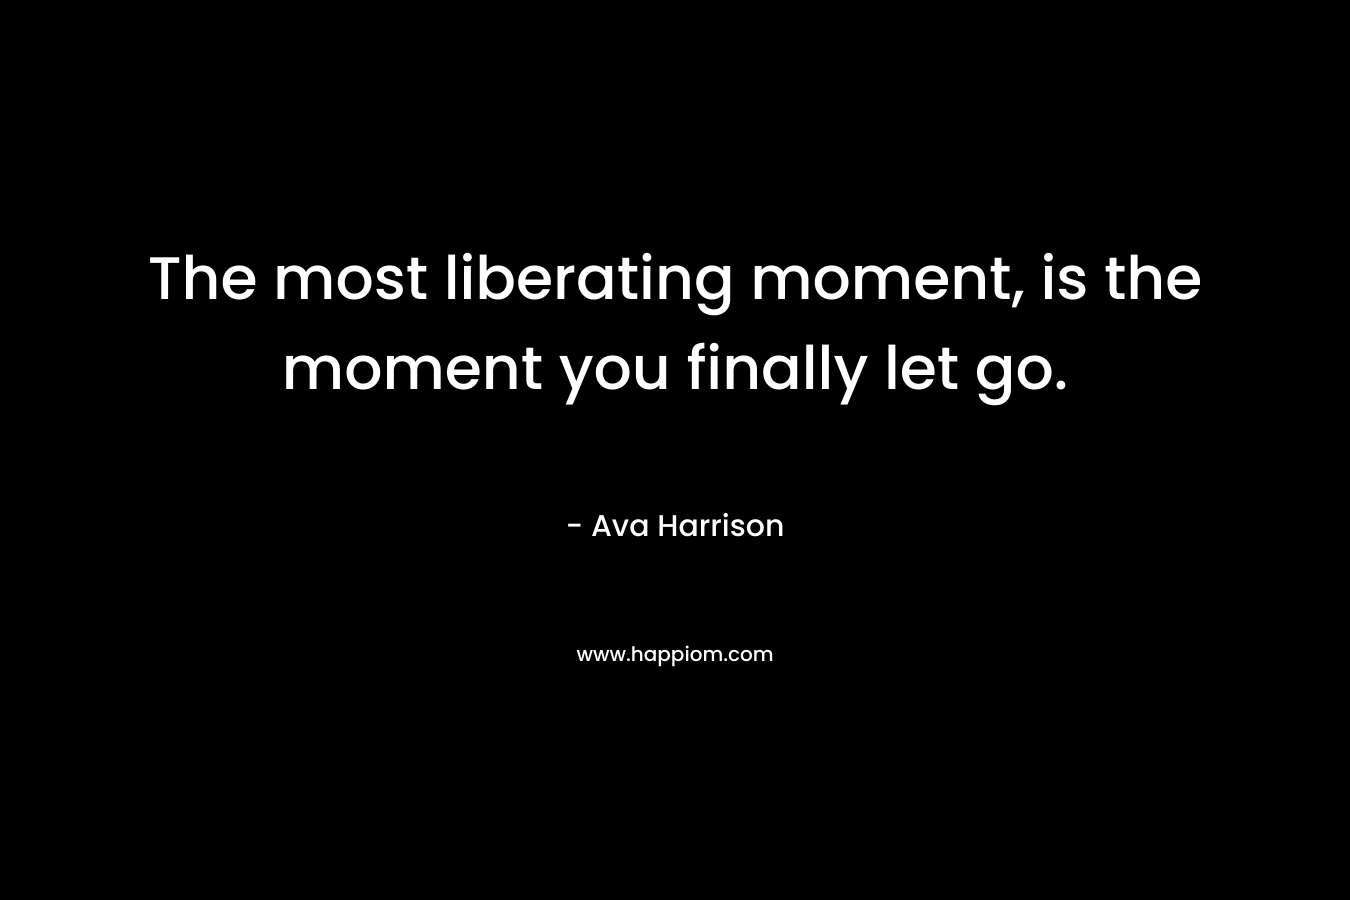 The most liberating moment, is the moment you finally let go. – Ava Harrison